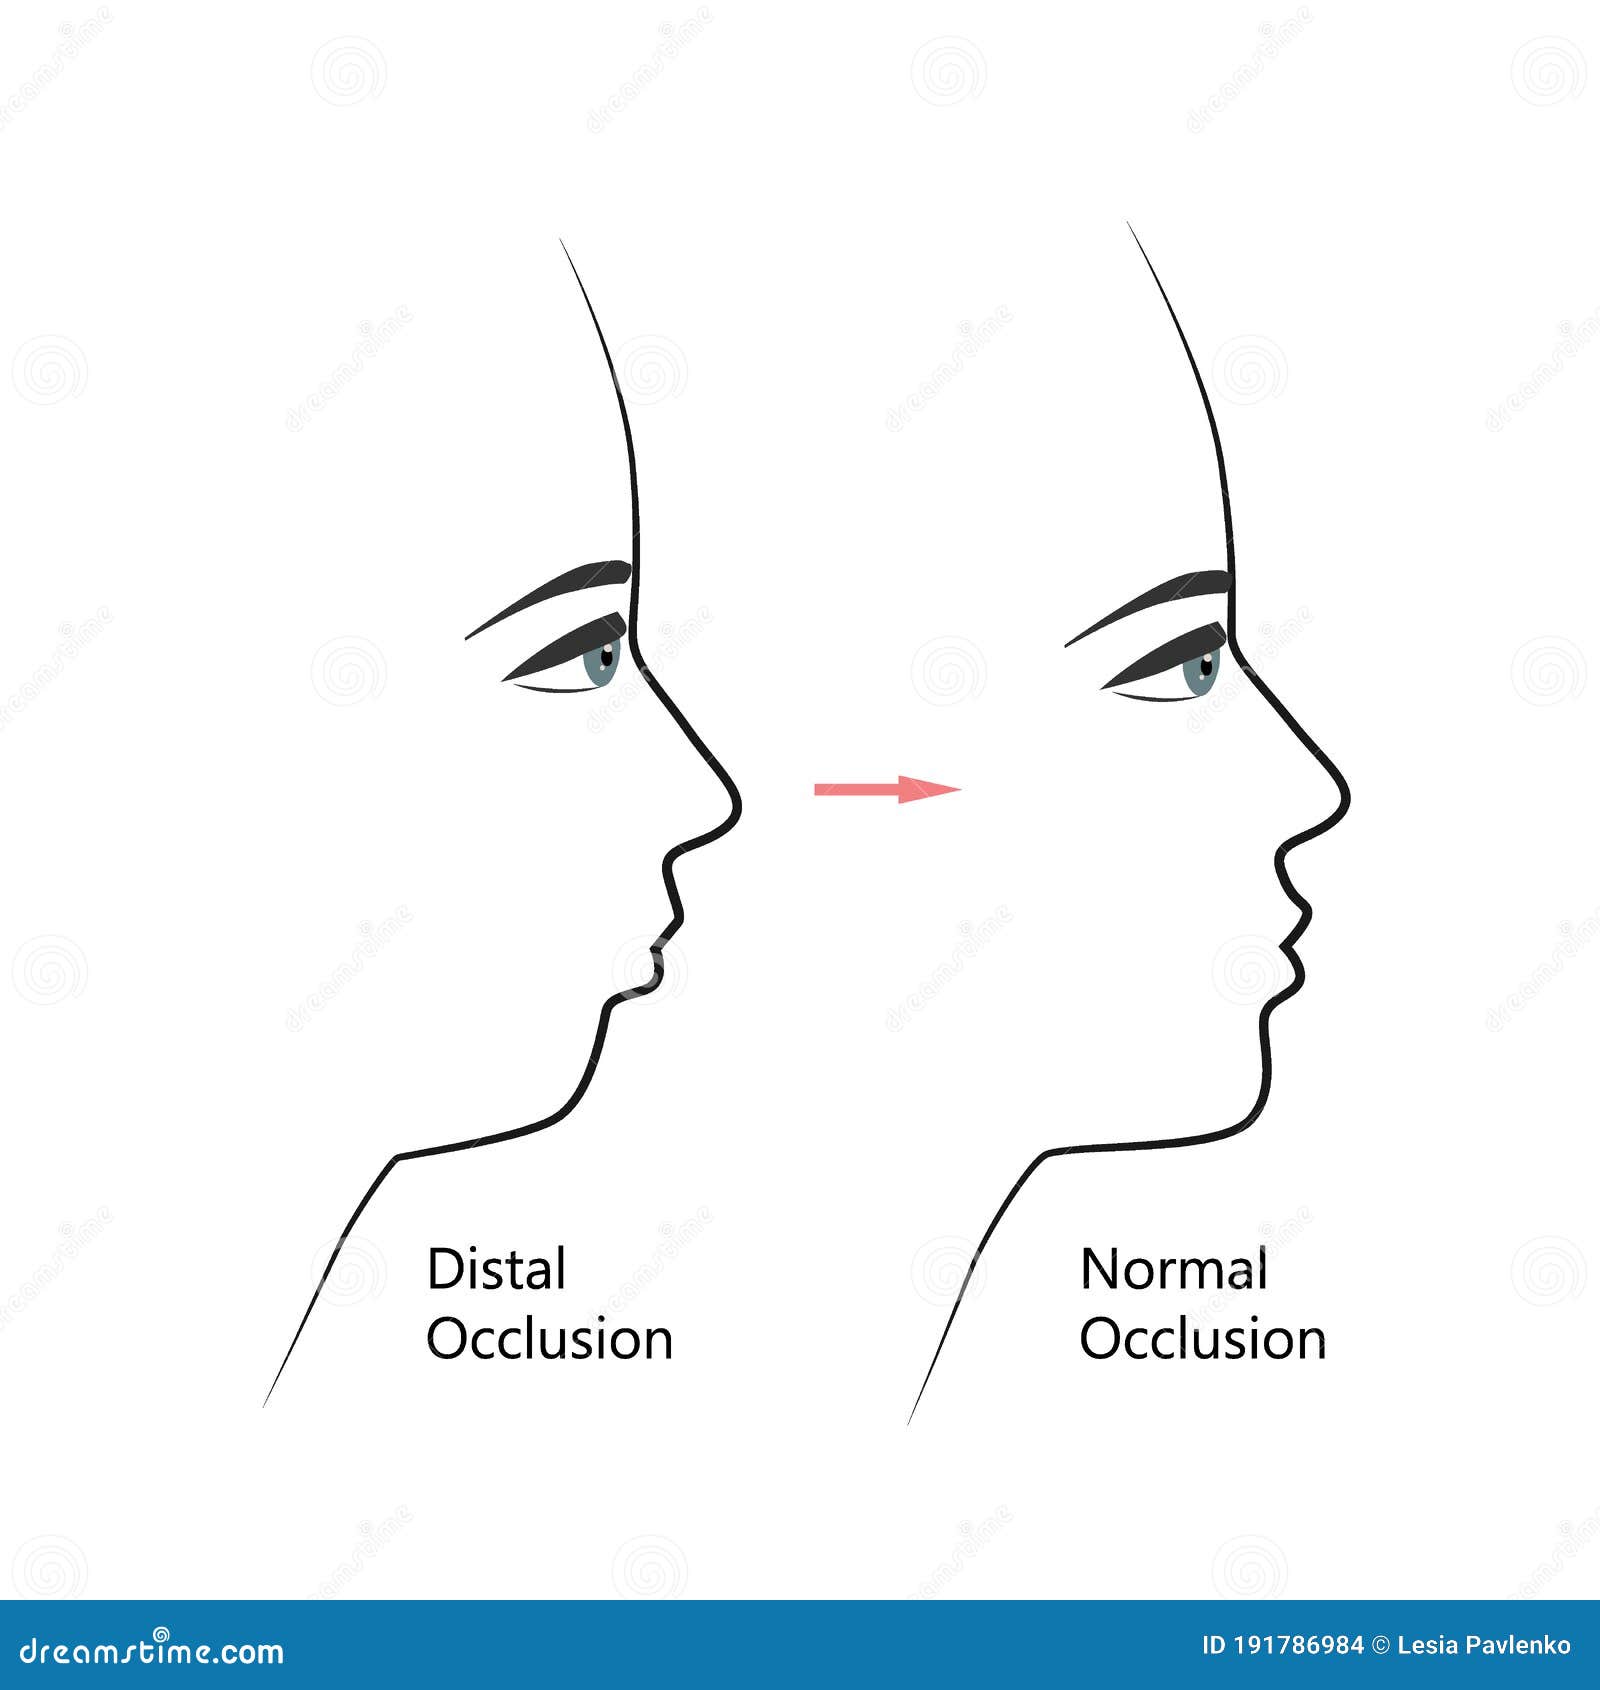 distal bite profile before and after orthodontic treatment. human with malocclusion, lower jaw pushing back, bite